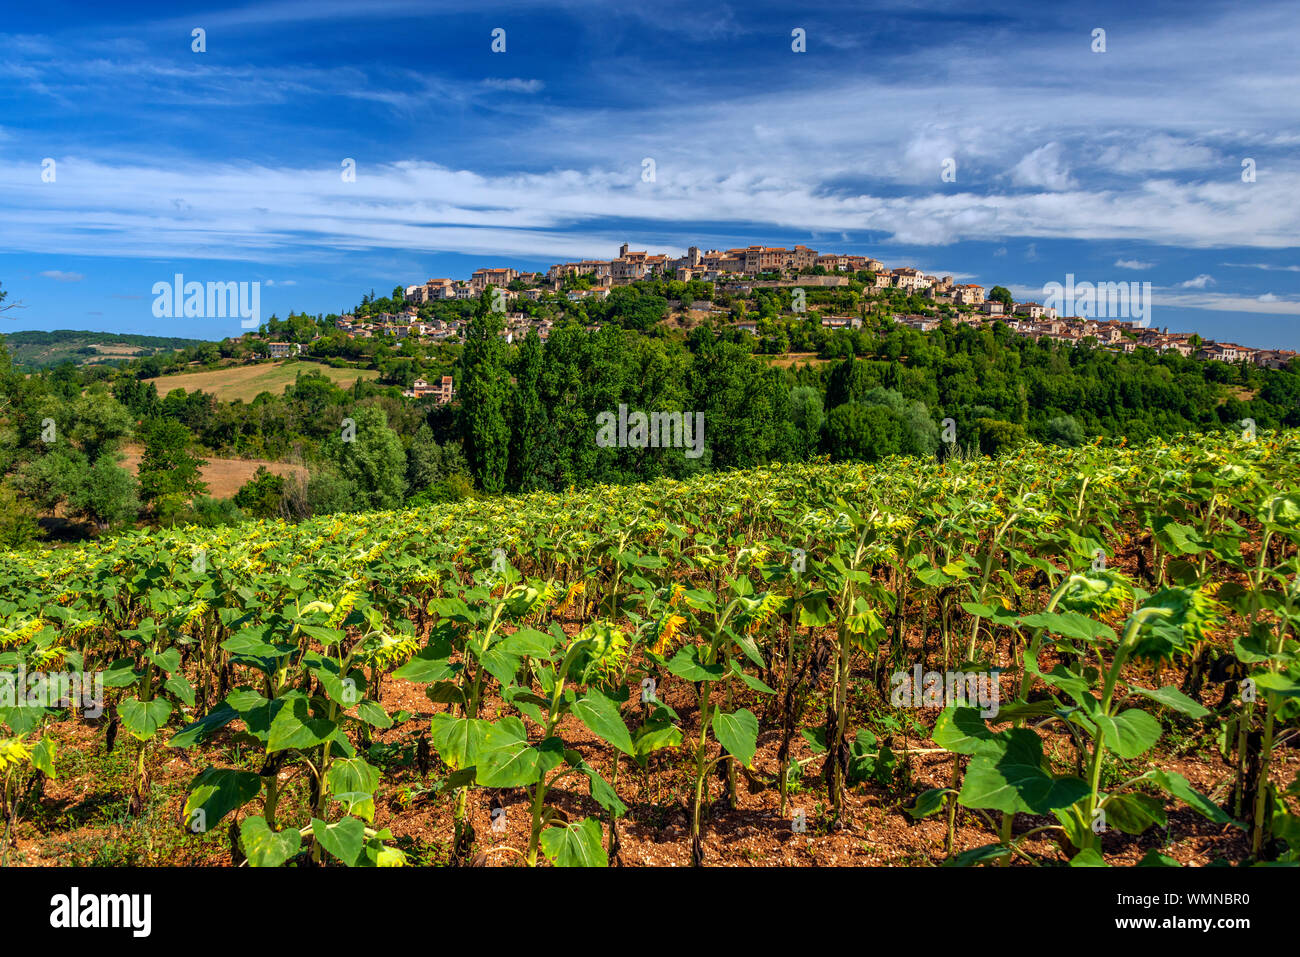 The medieval hilltop village of Cordes-sur-Ciel in the Tarn department of Occitanie, France. Stock Photo